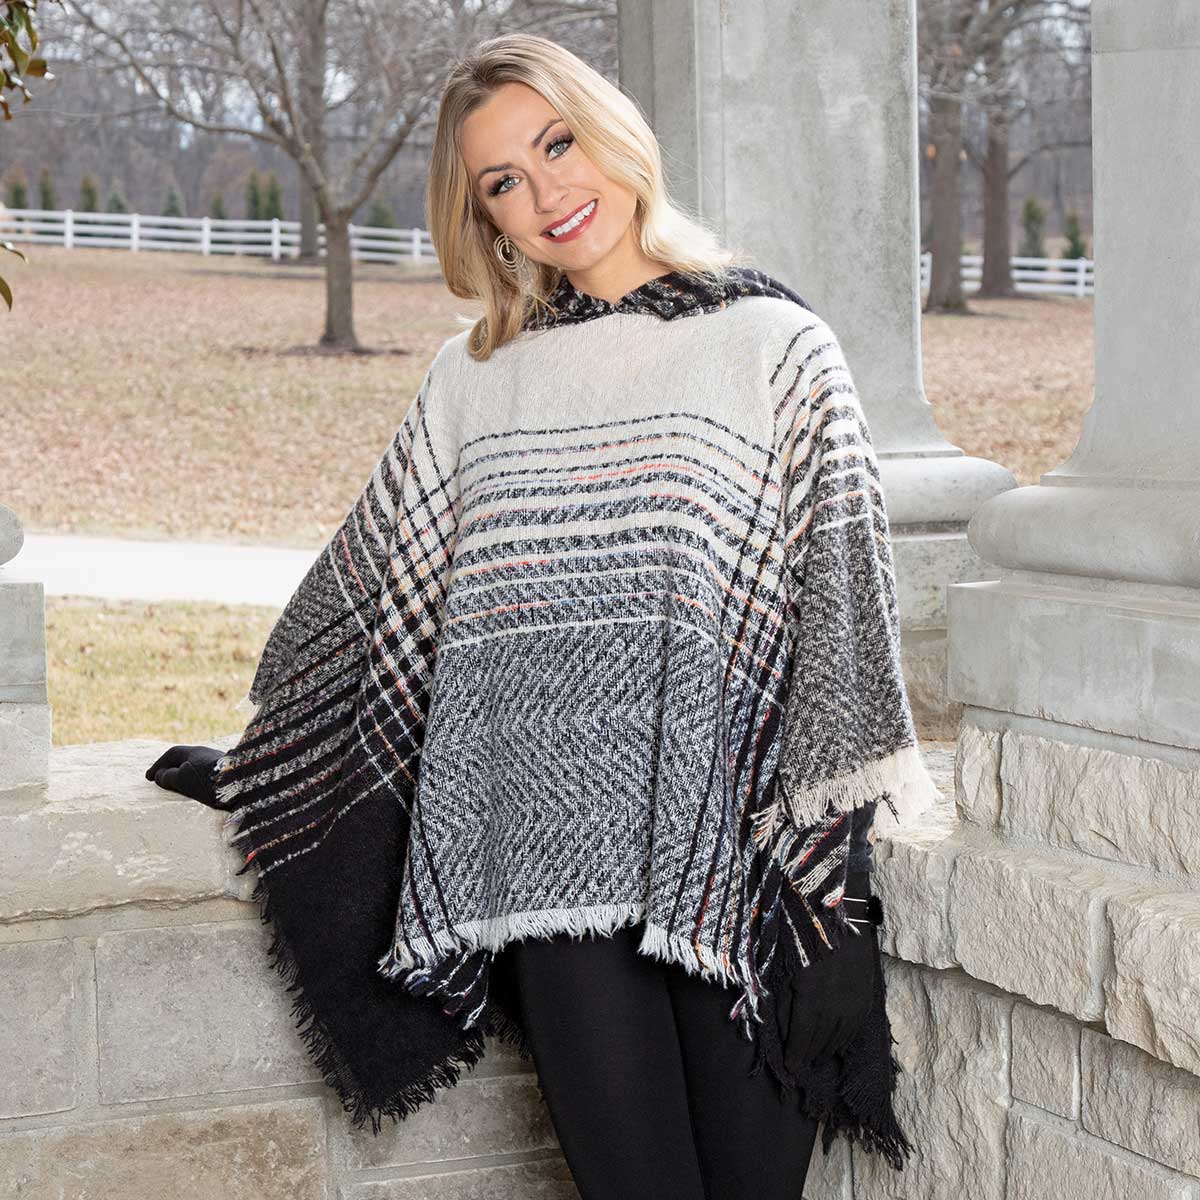 PONCHO WITH HOOD BLACK/CREAM 53IN X 27IN